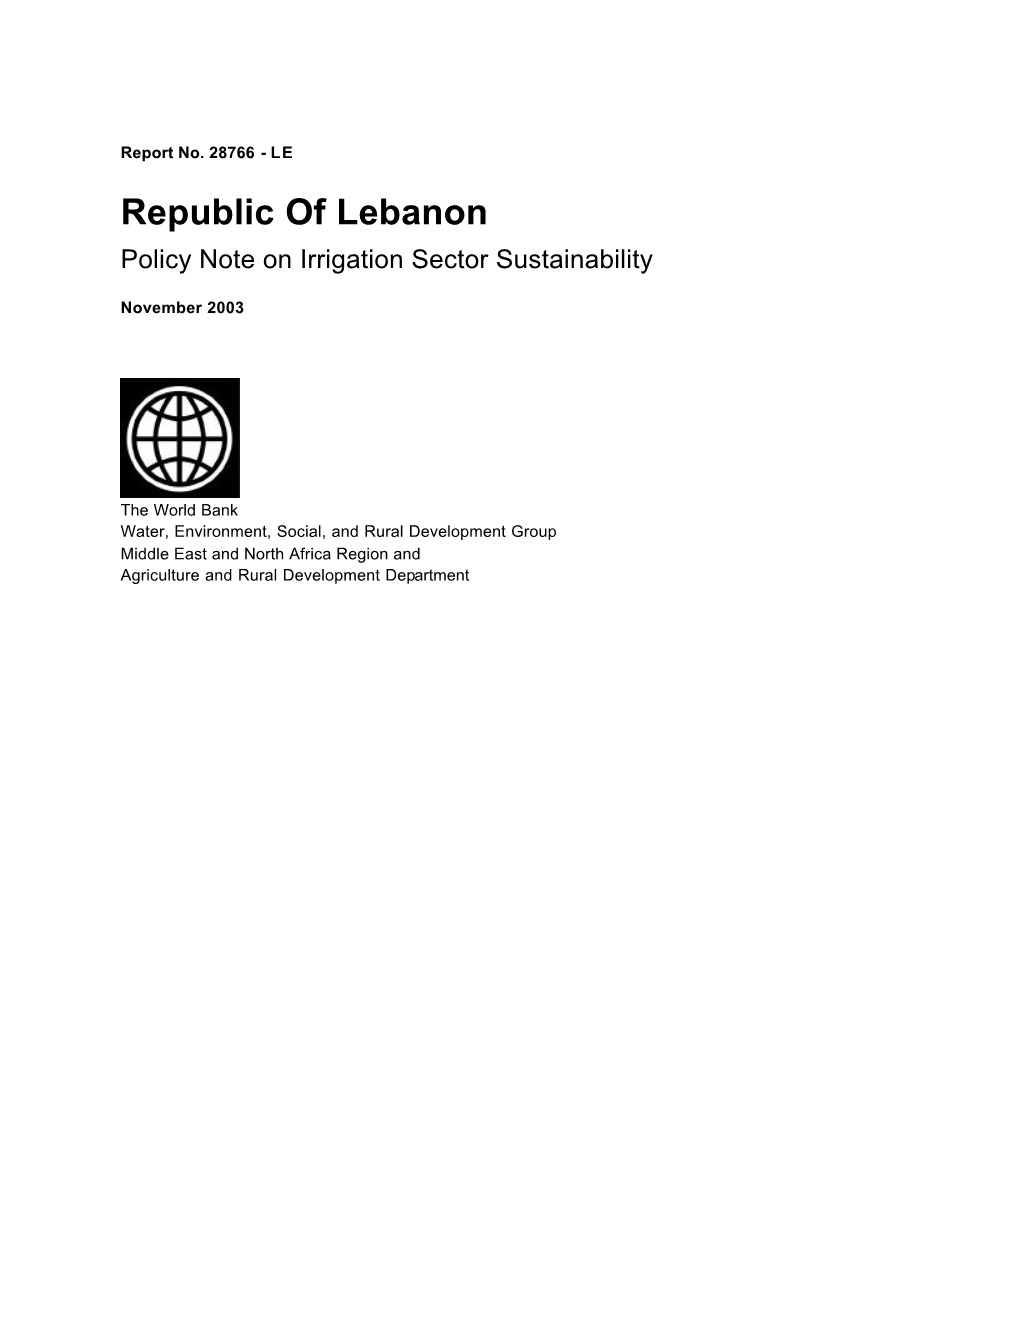 Republic of Lebanon Policy Note on Irrigation Sector Sustainability